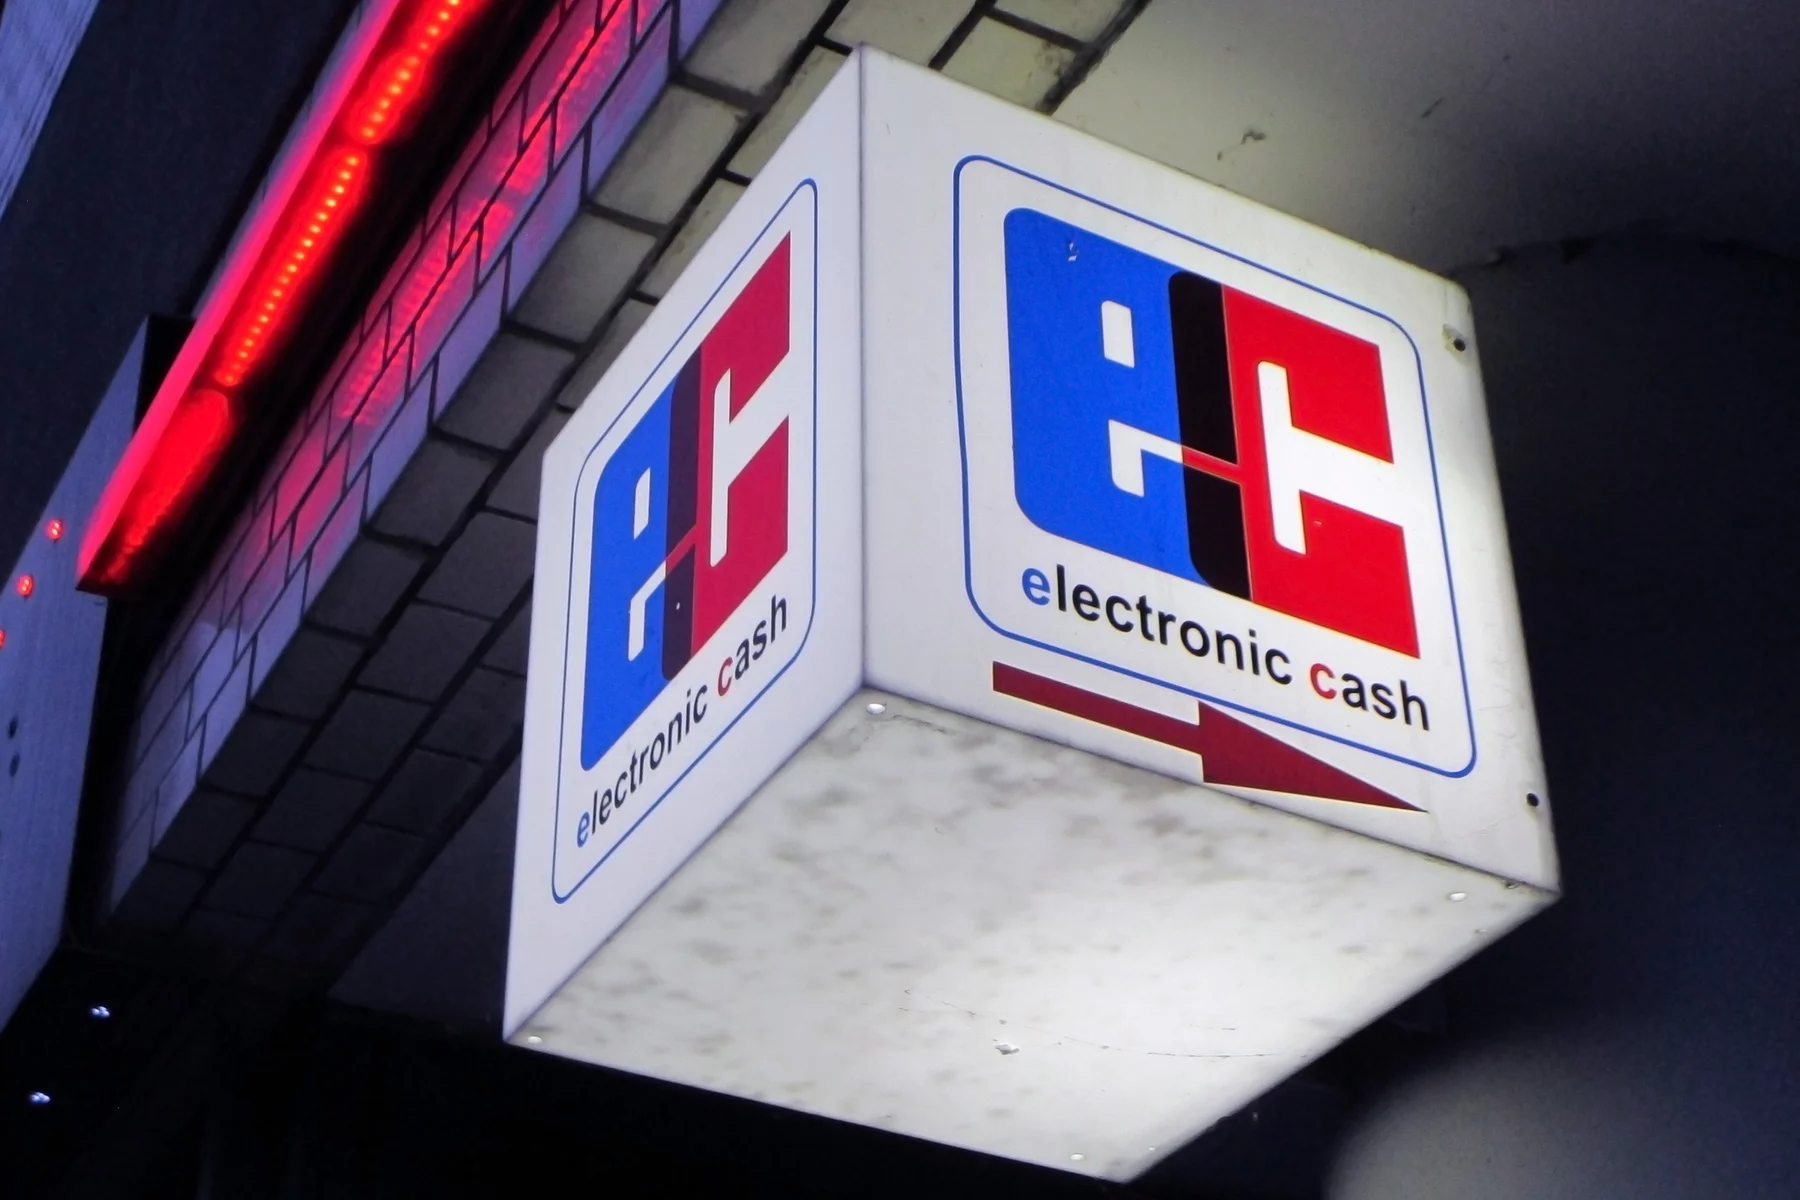 An electronic cash sign in Berlin